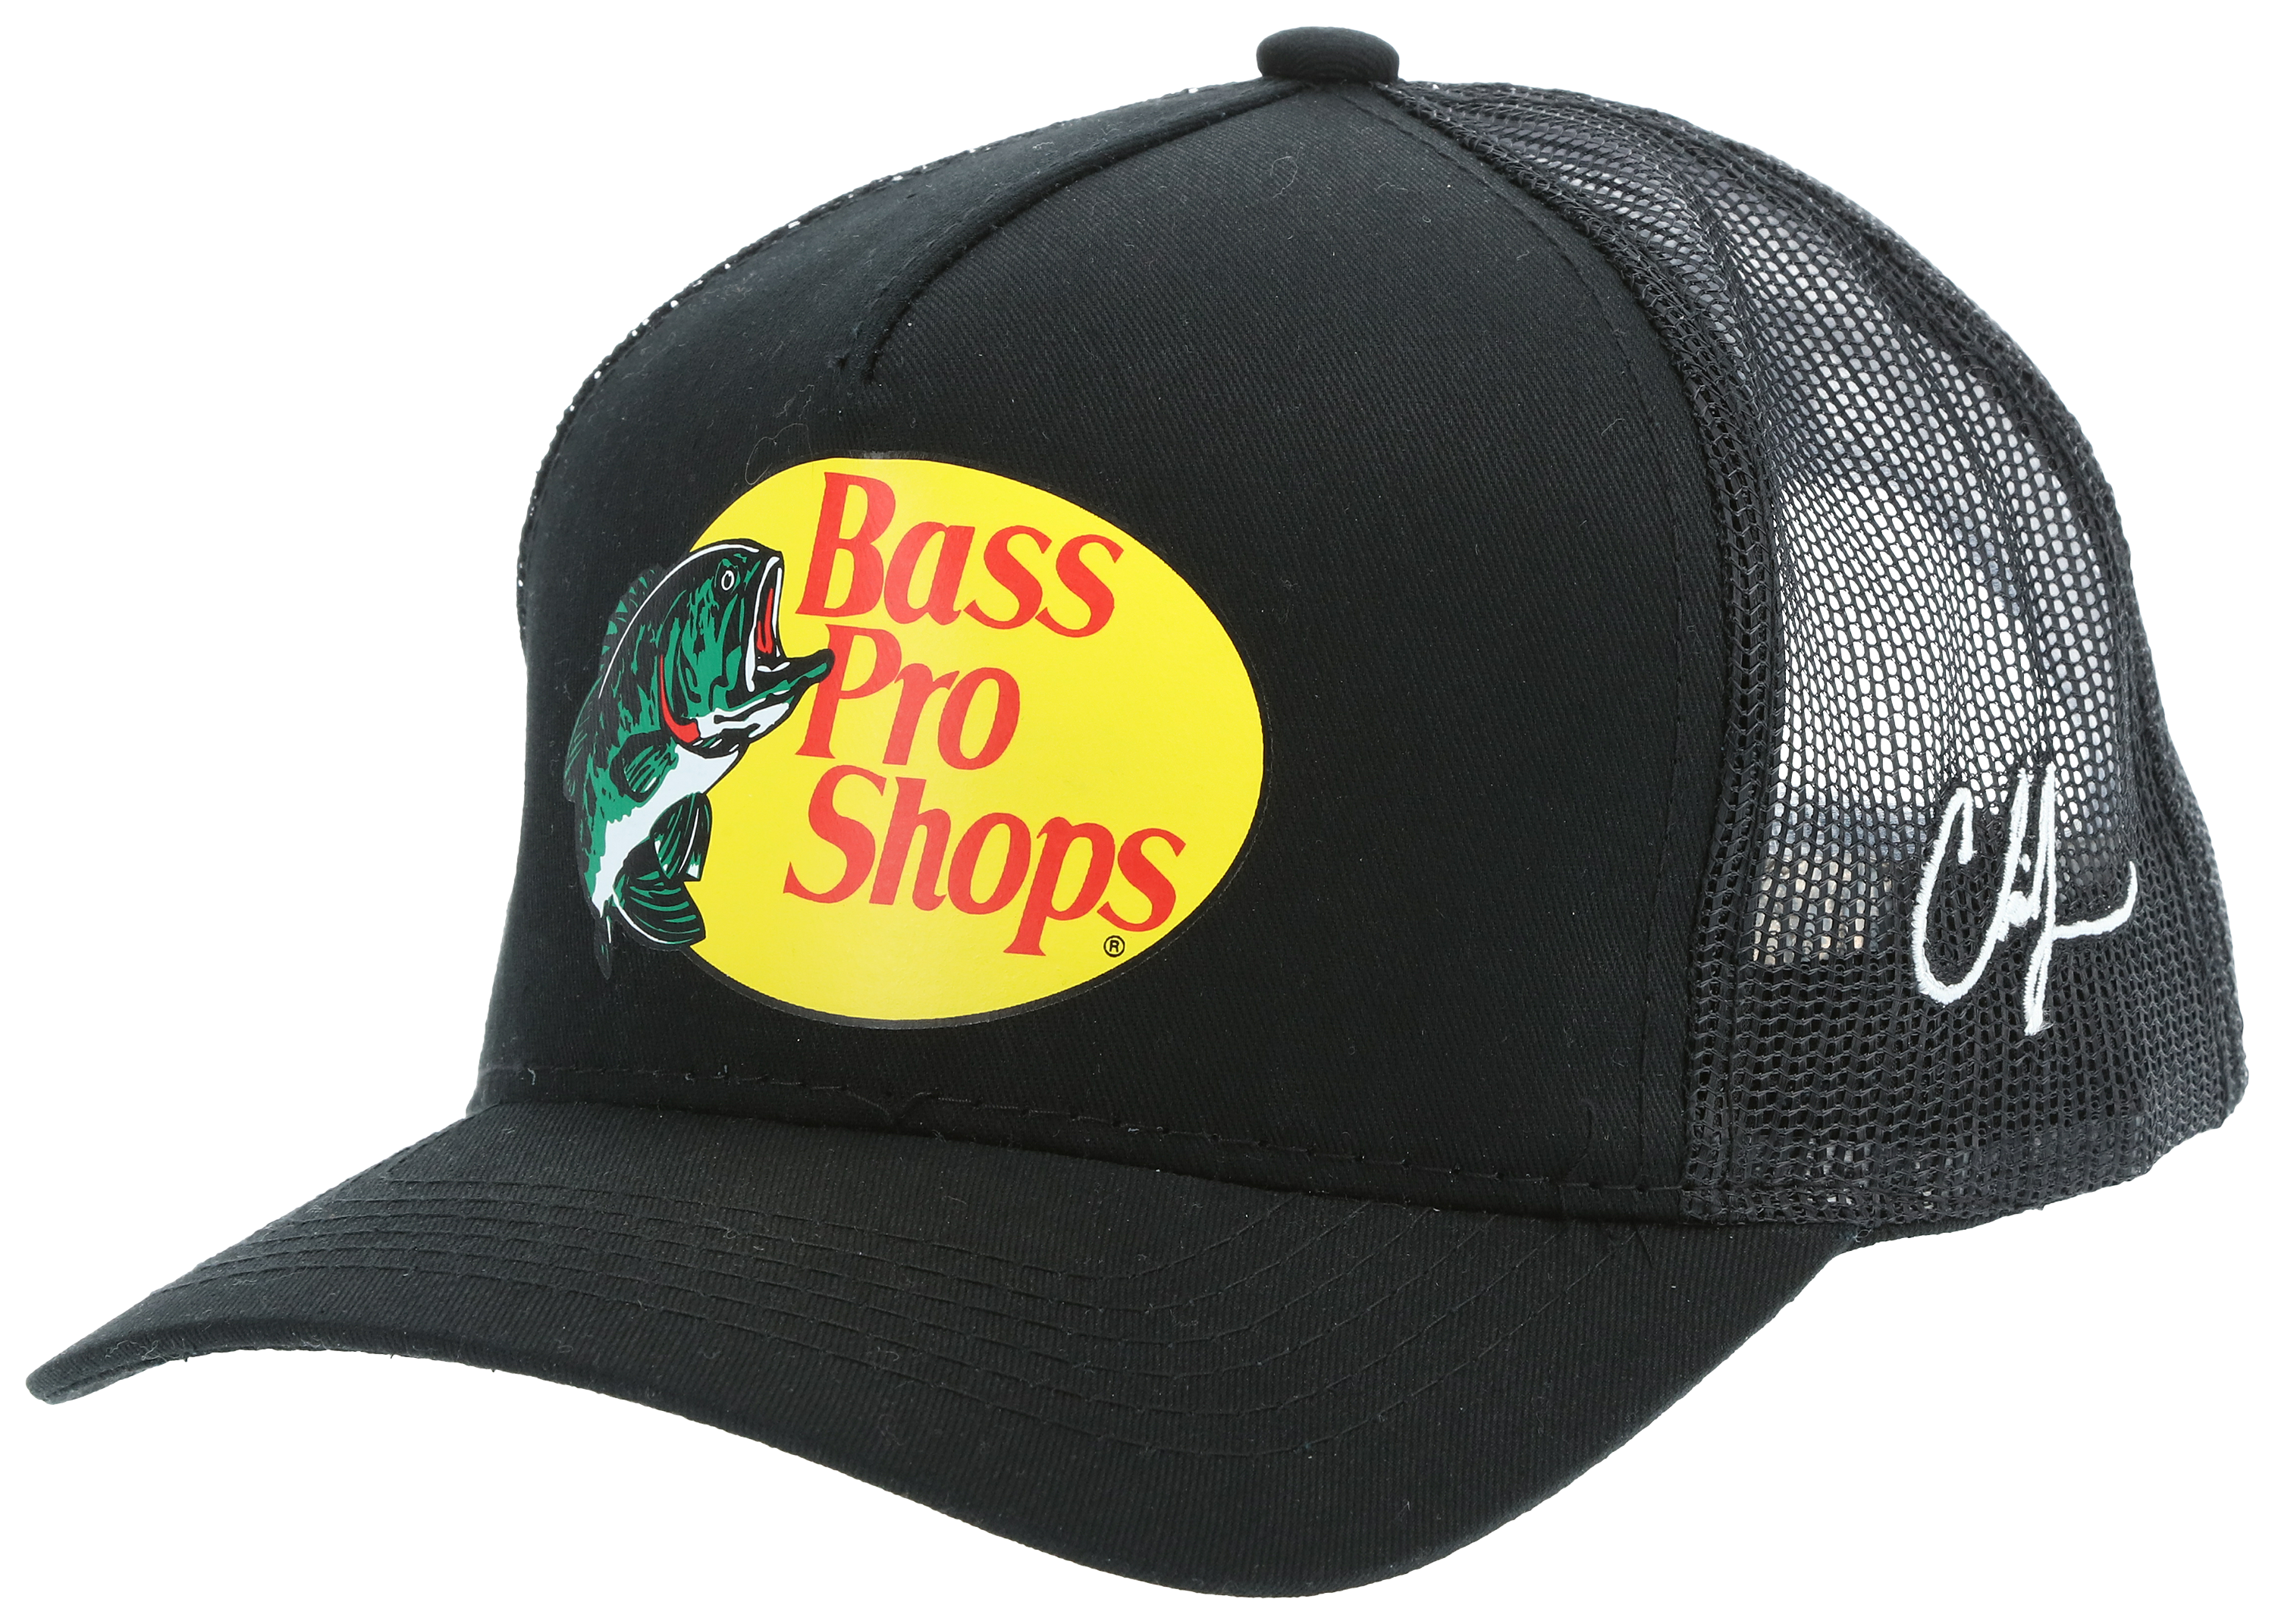 Bass Pro Shops Bass Pro Shop Hat - $10 - From M A I L